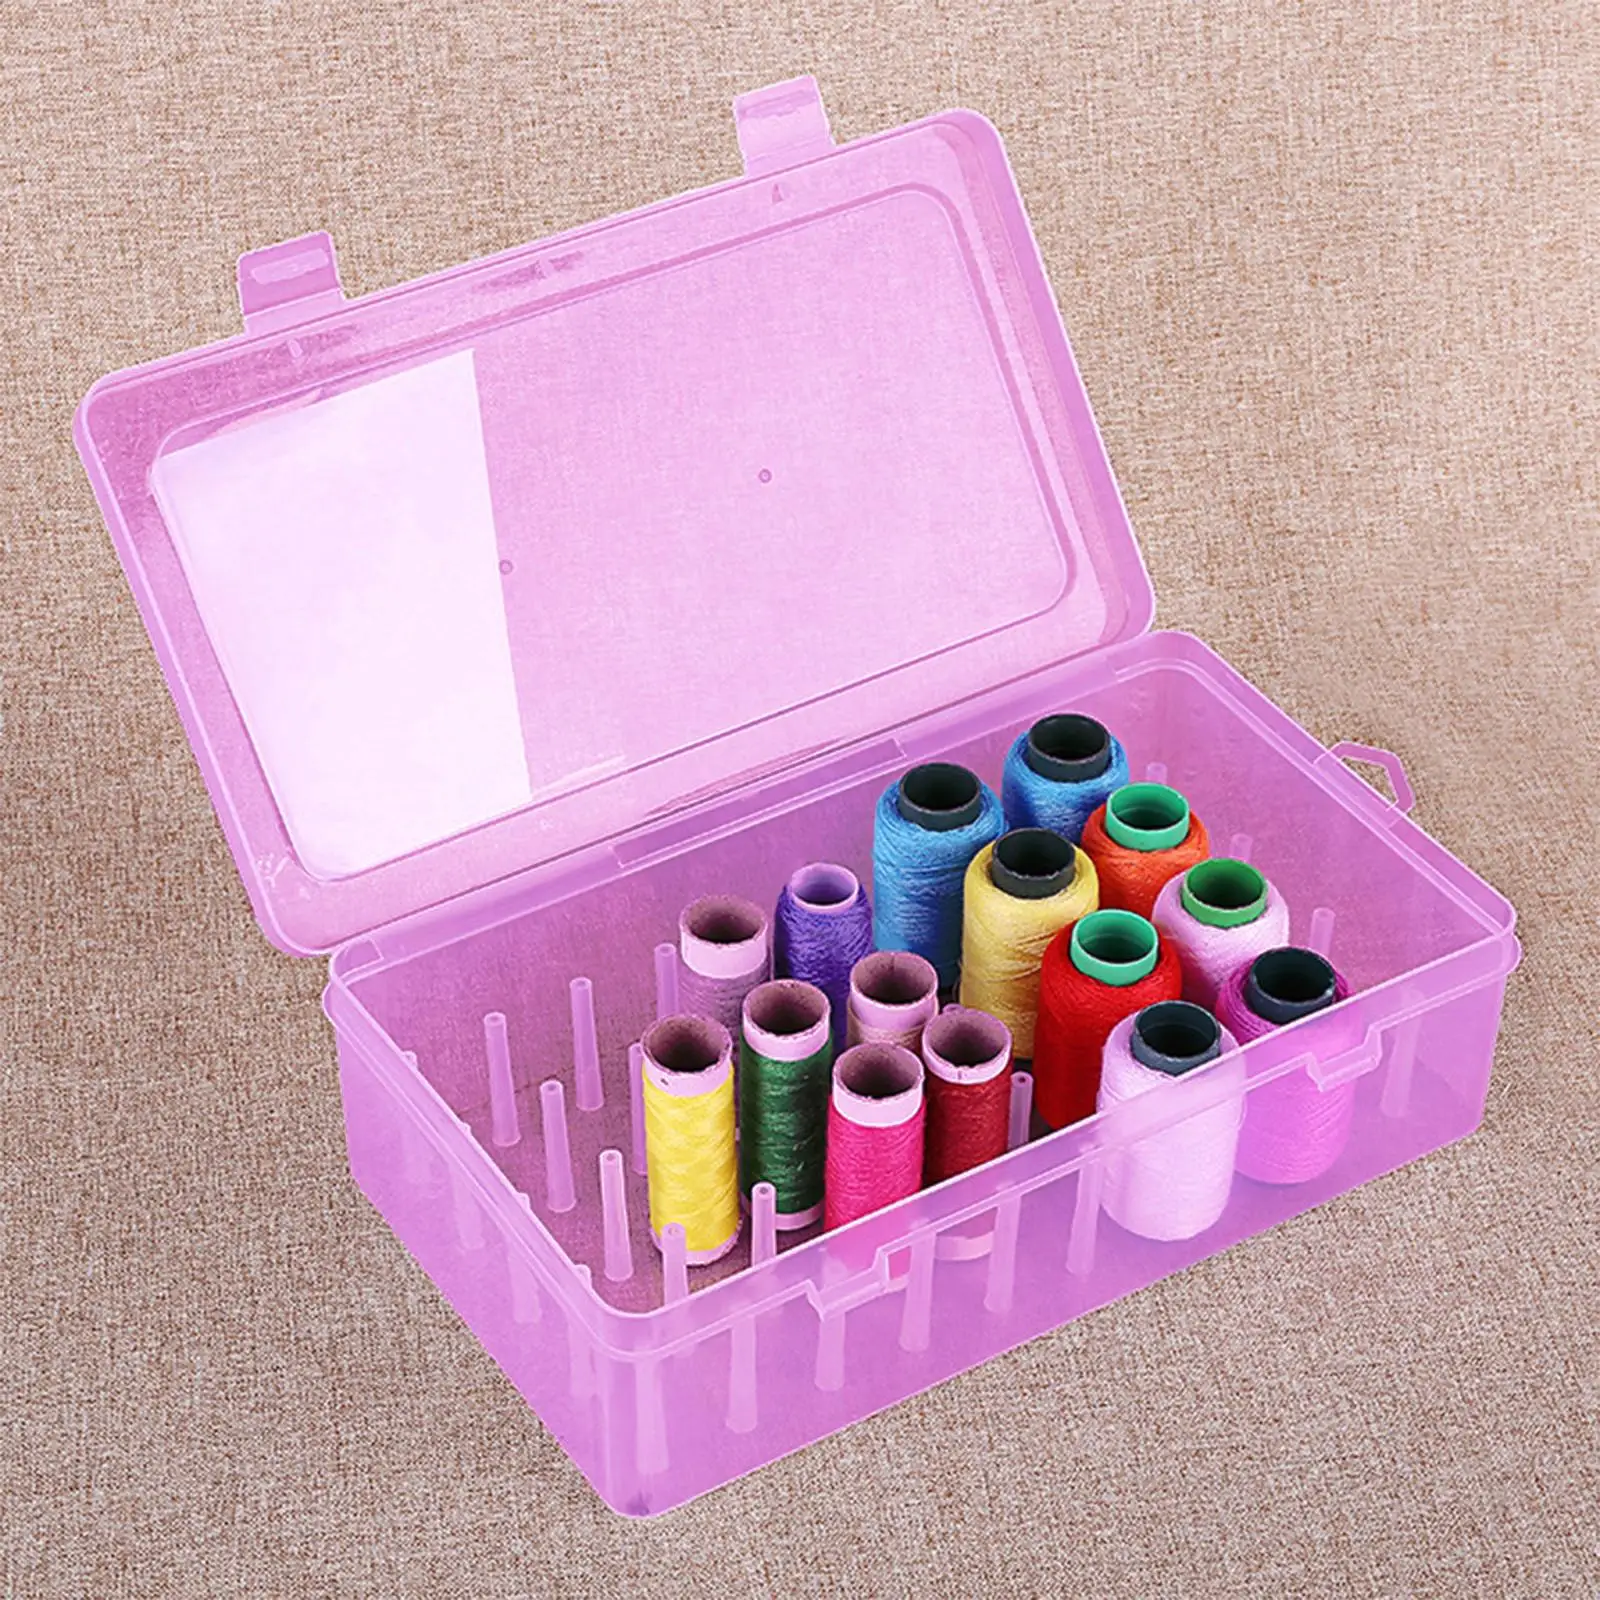 Sewing Thread Storage Box Transparent 42 Embroidery Thread Organiser for